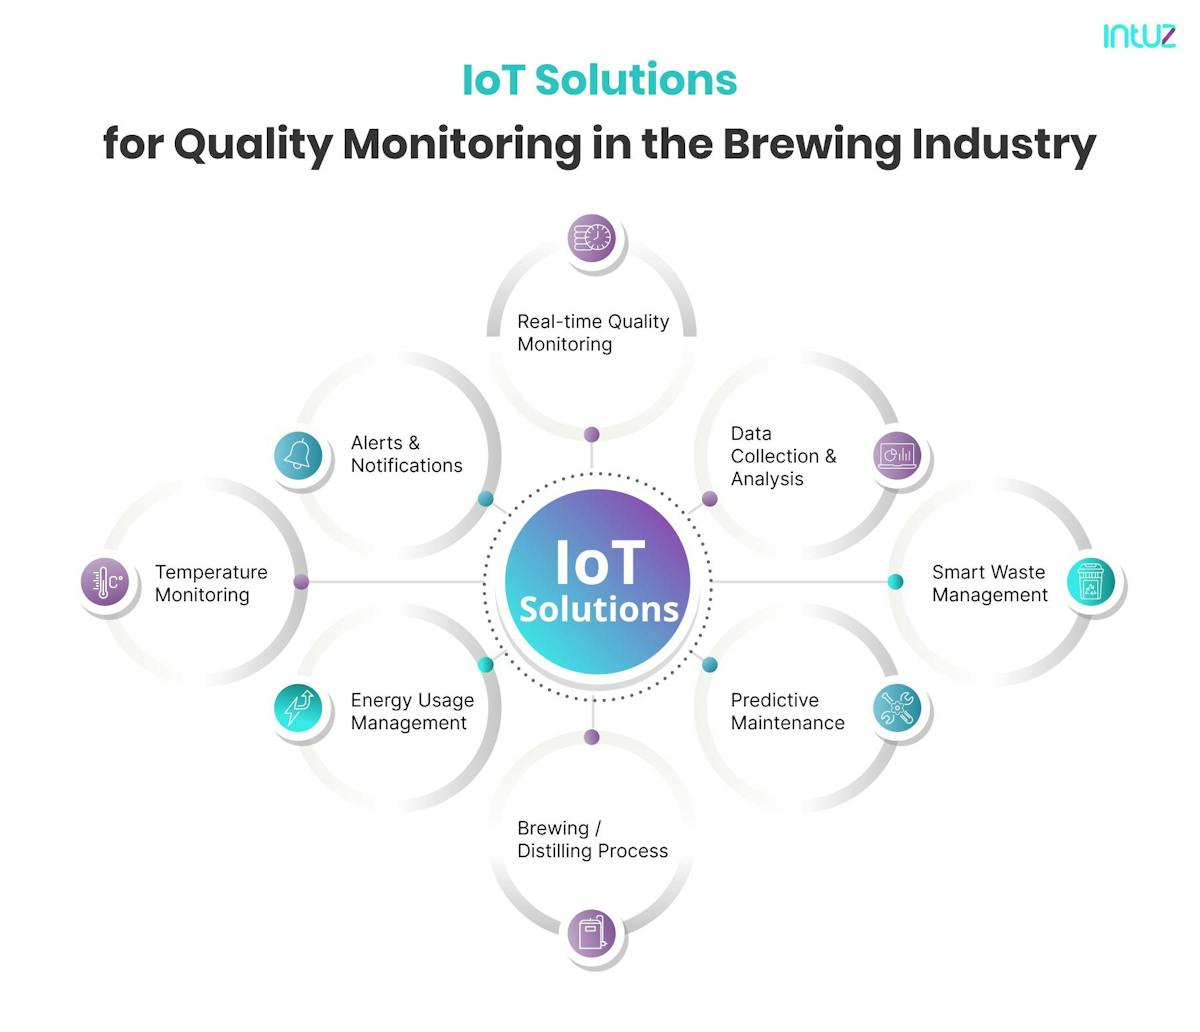 IoT solutions for quality monitoring in the brewing industry